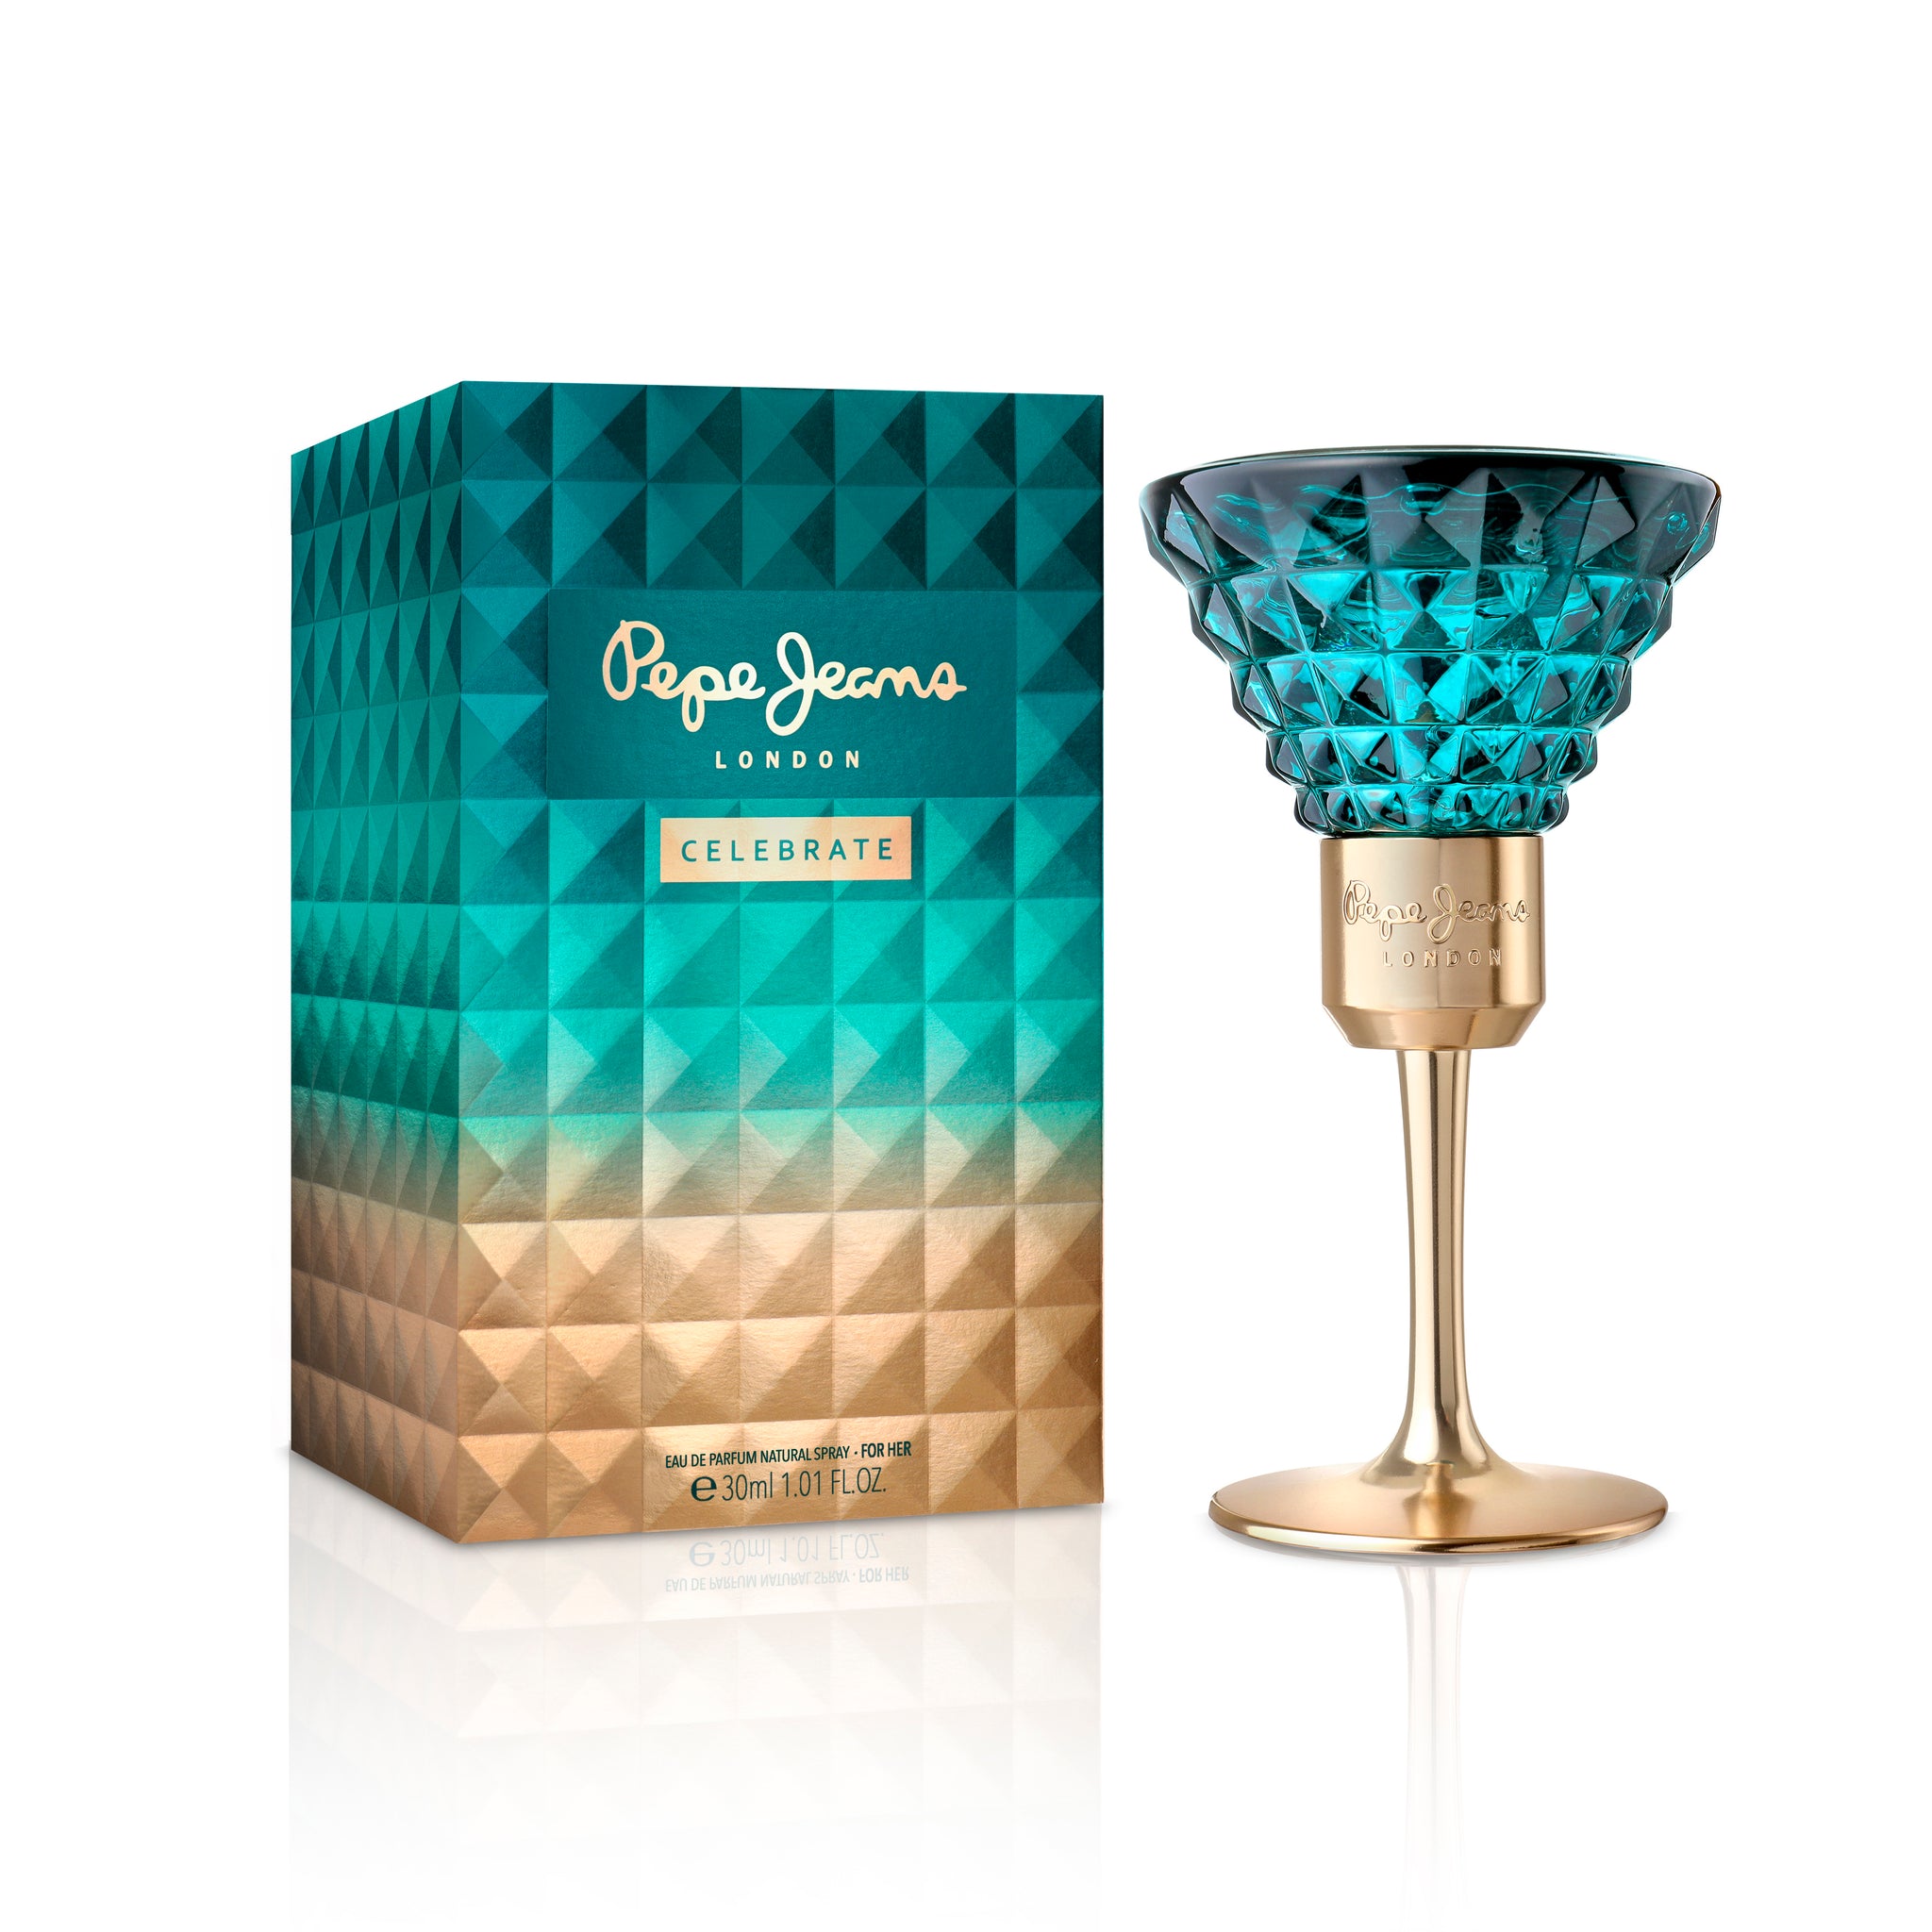 PEPE JEANS CELEBRATE Beauty 2 GWP THE | SIZES 80ML IN HER - + AVAILABLE OF FOR Bar